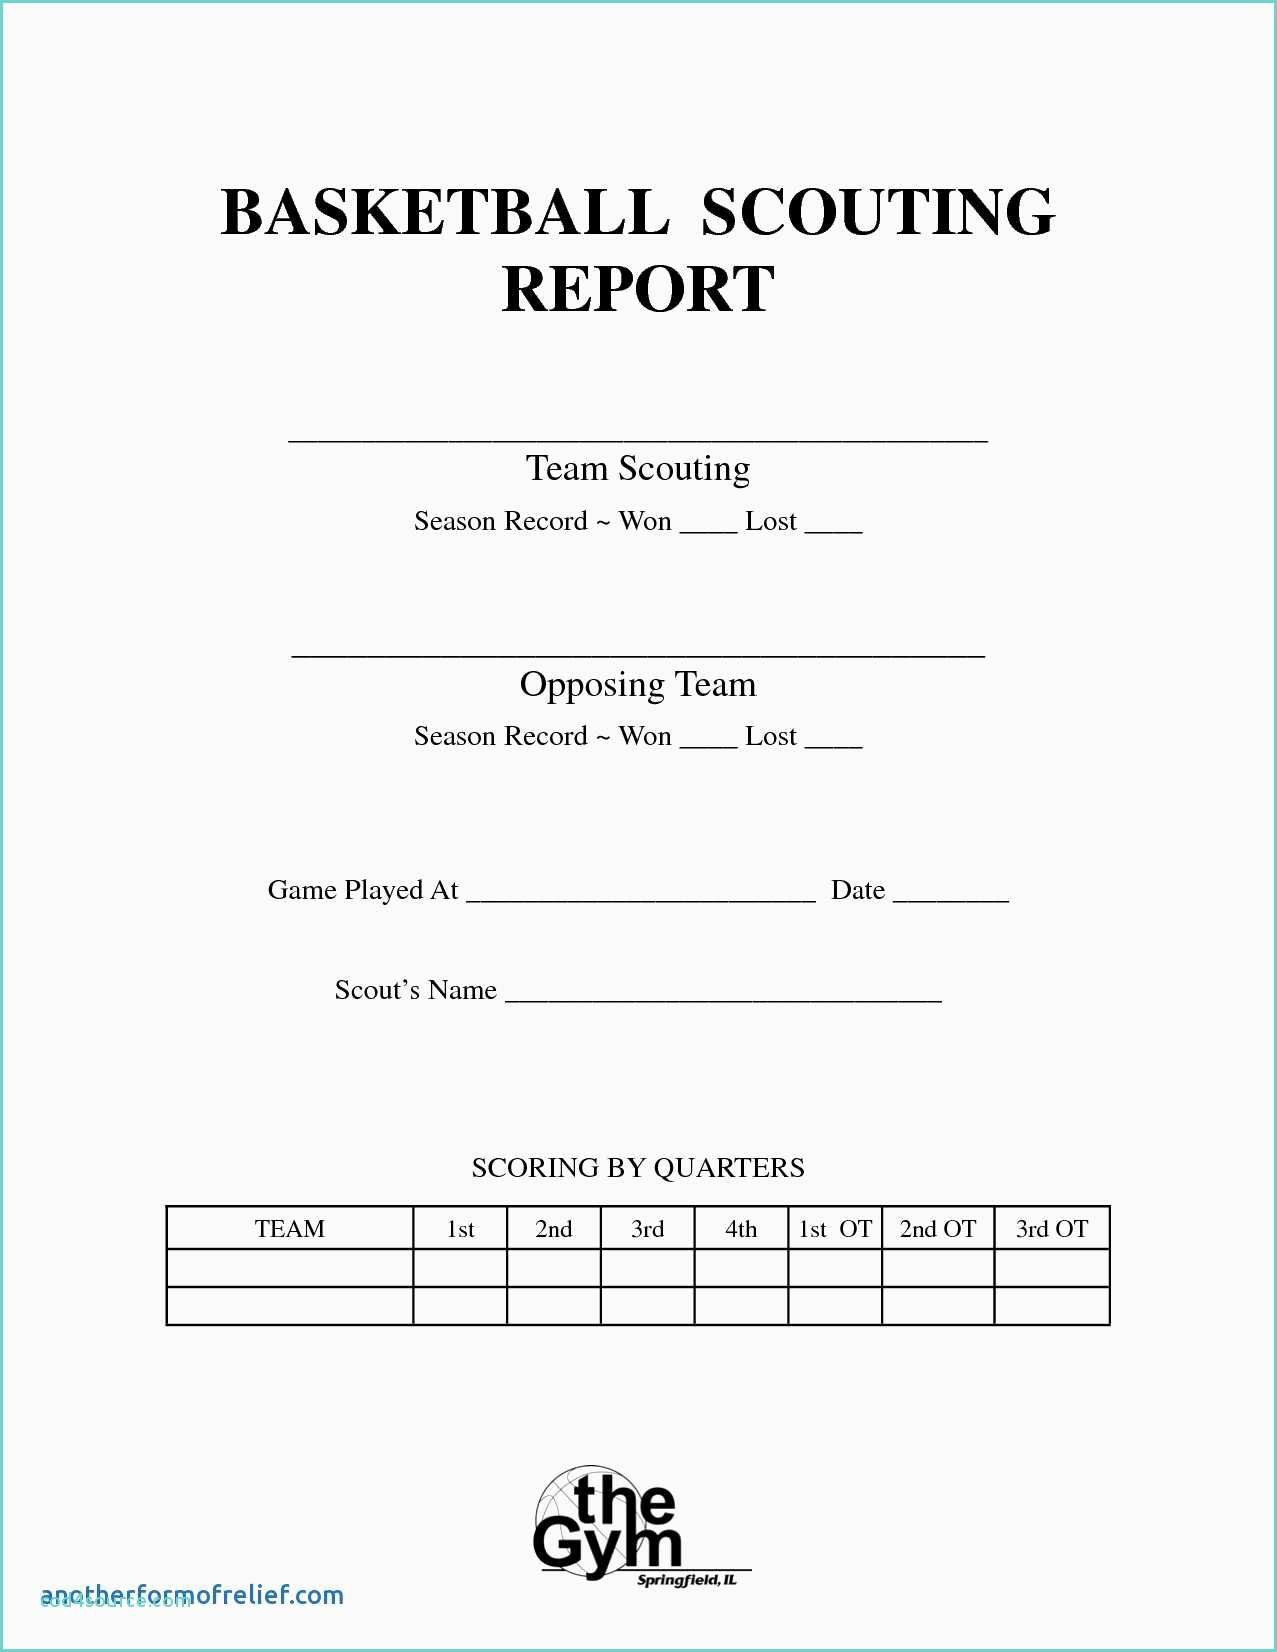 Bowling Spreadsheet And Basketball Scouting Report Template Regarding Basketball Scouting Report Template